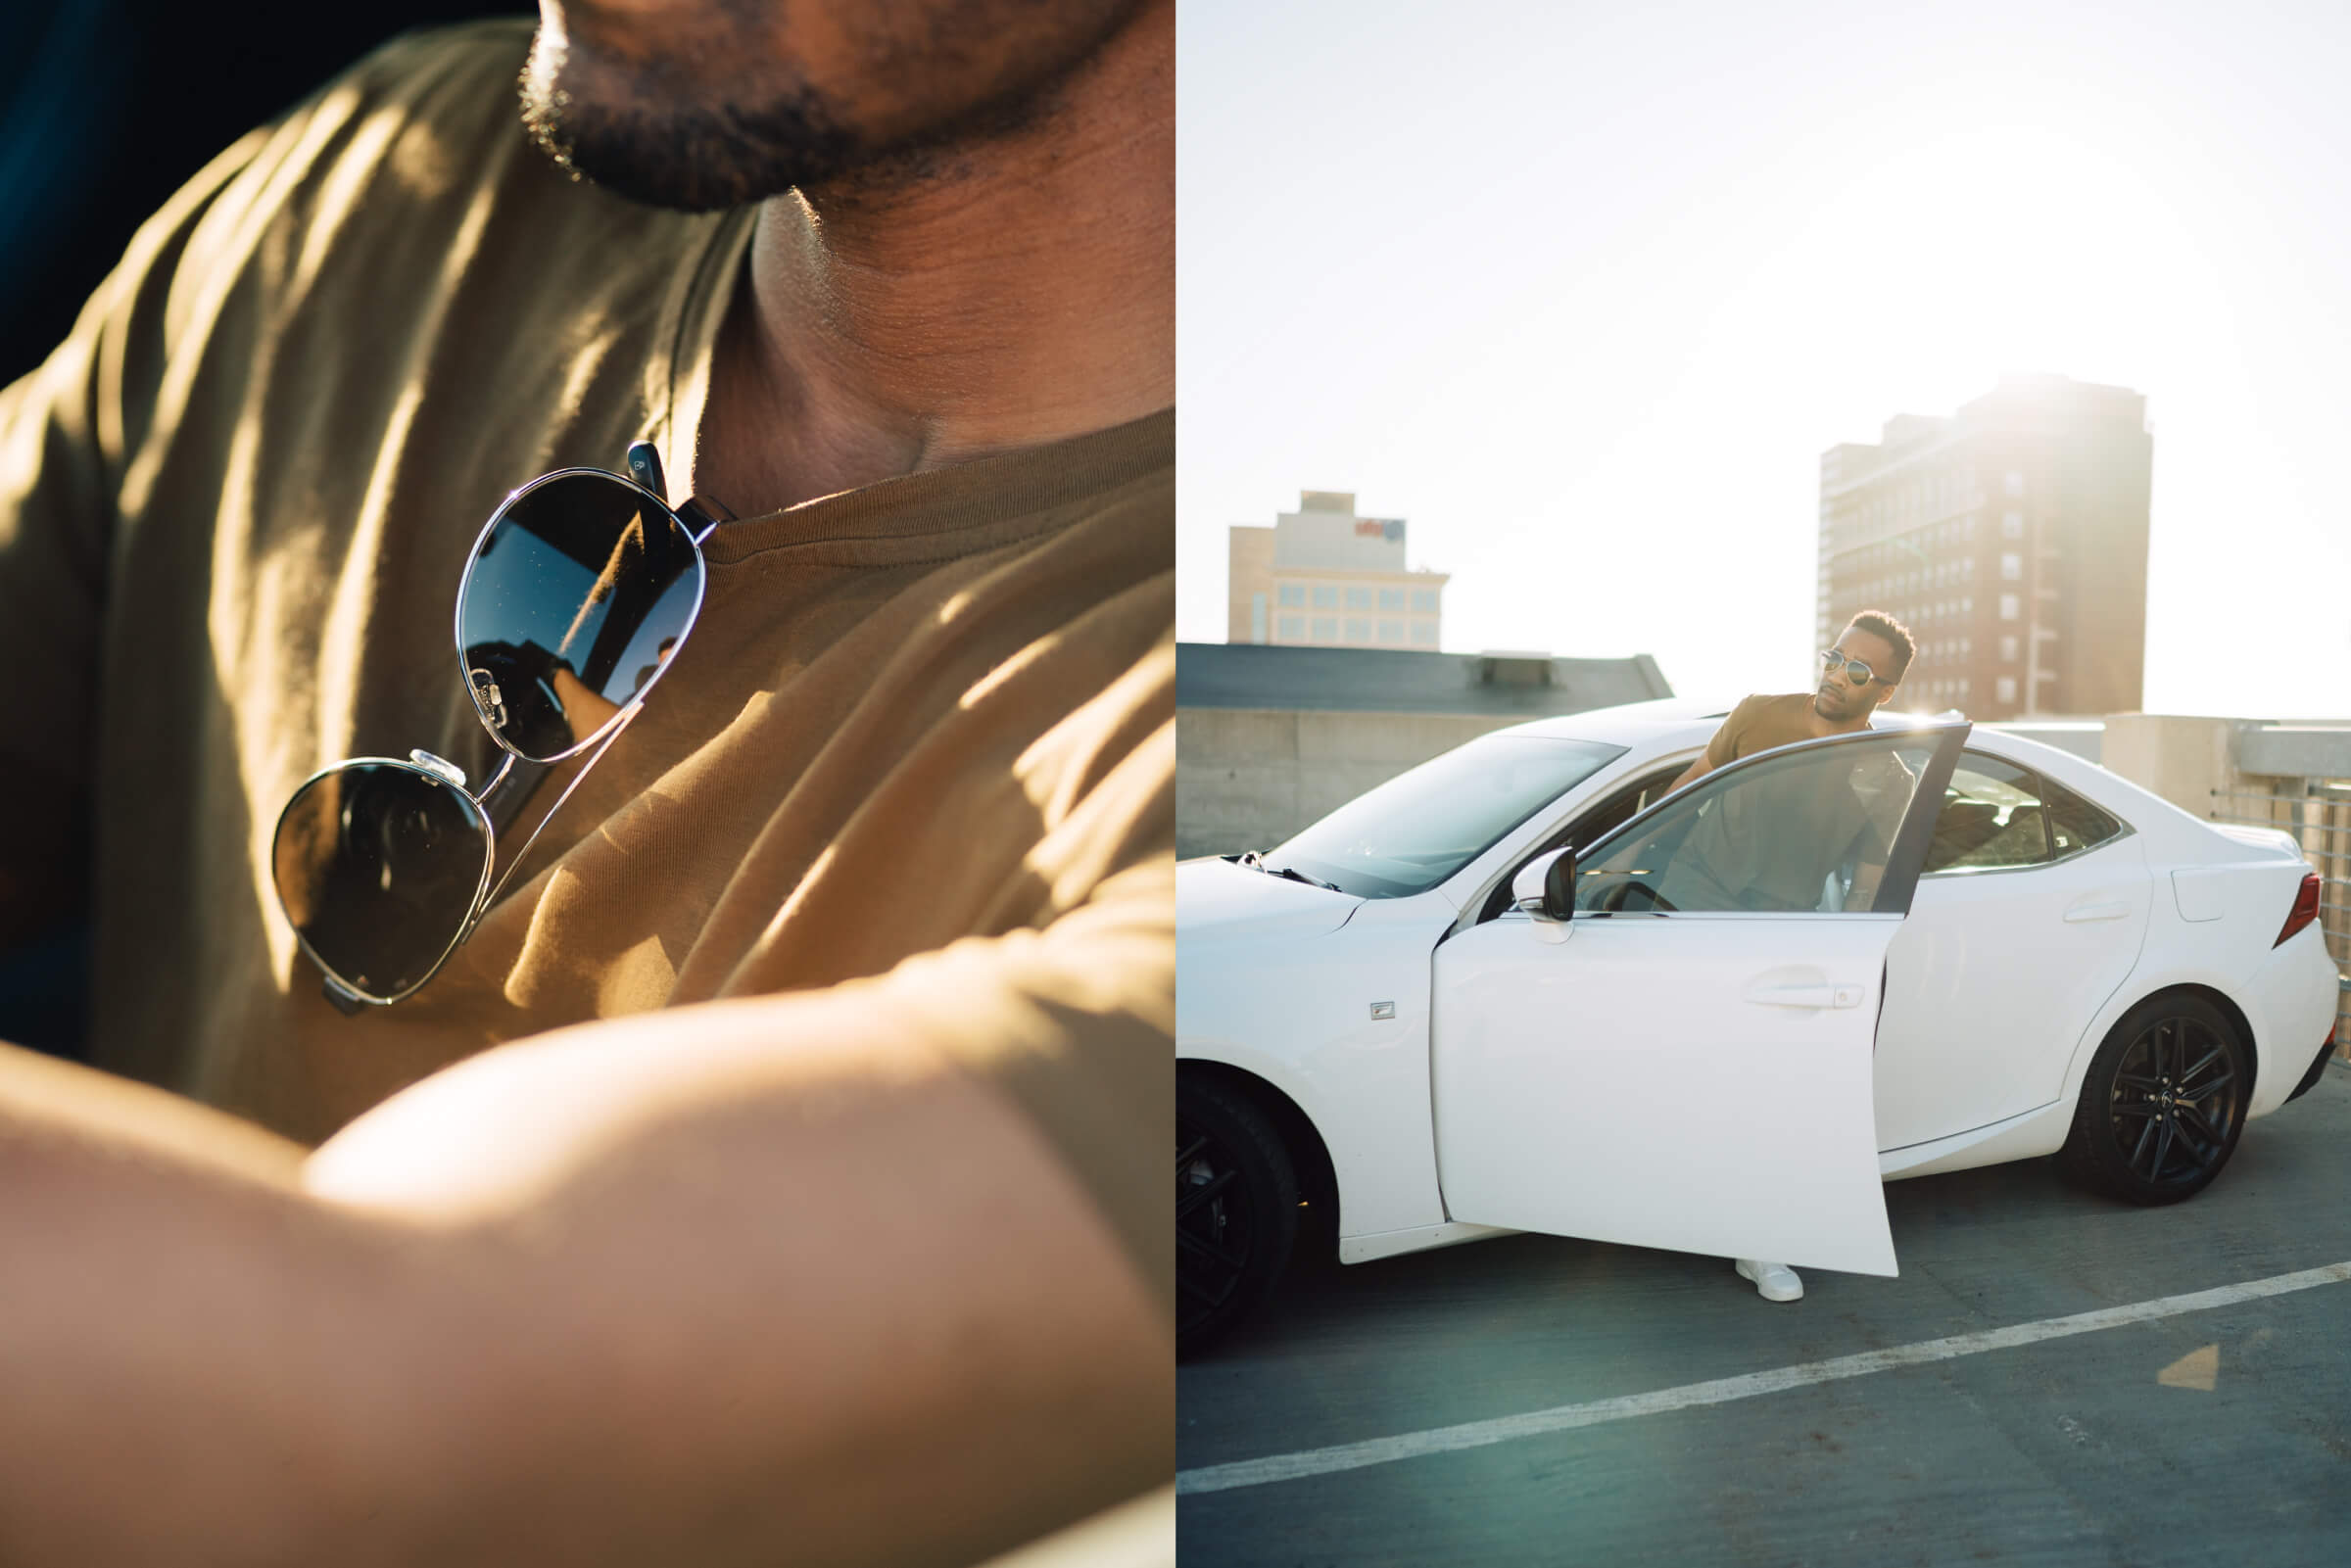 Two photos of Maverick titanium aviator sunglasses, one magnetically attached to his shirt collar, the other a man stepping out of a sports car wearing the sunglasses